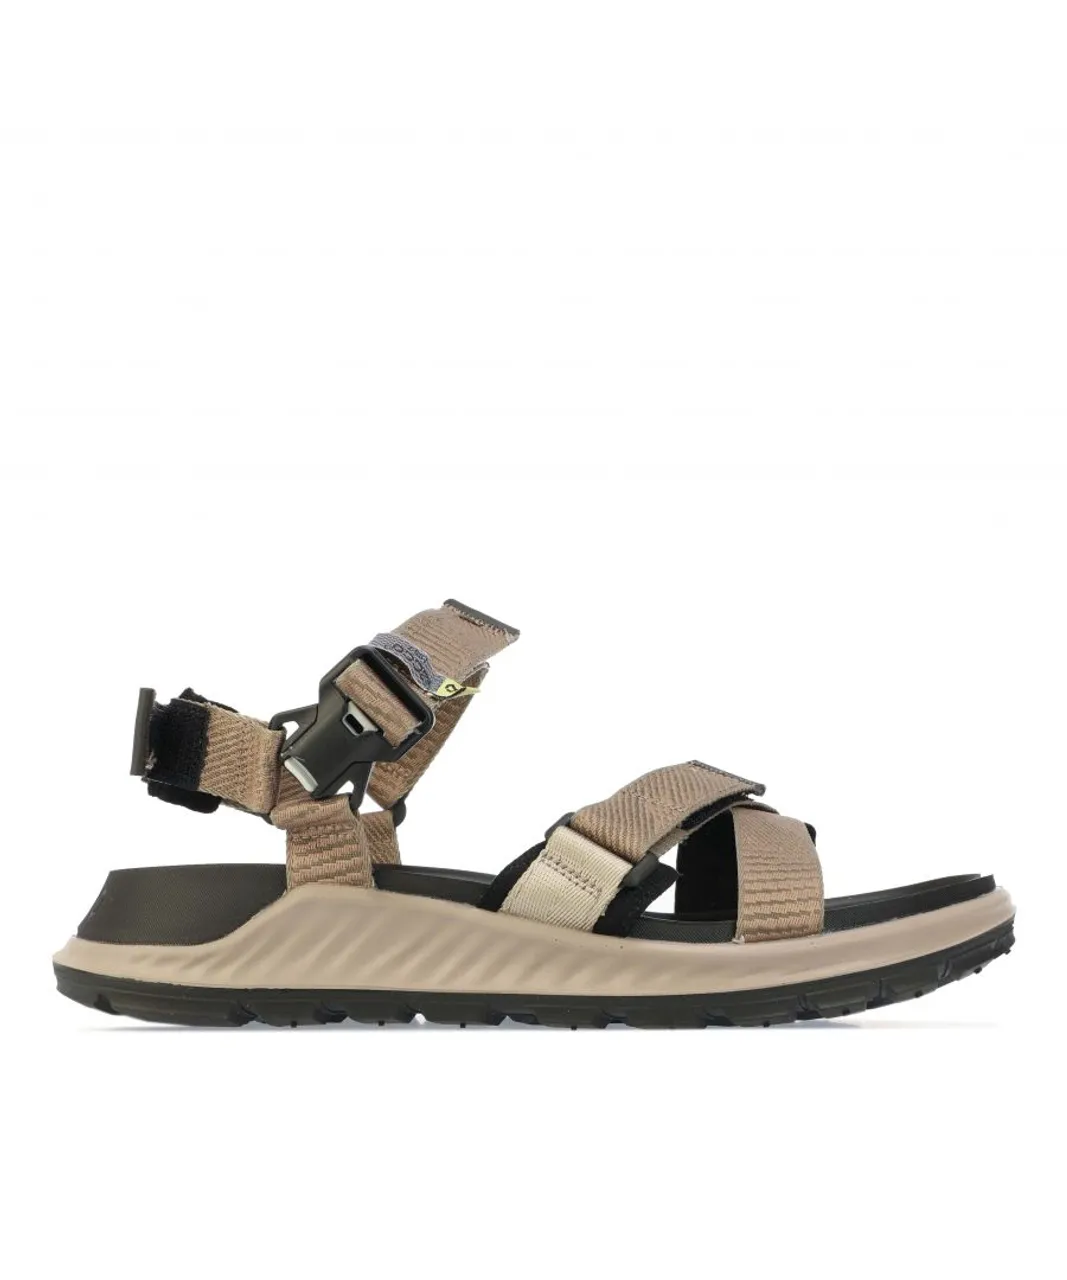 Ecco Mens Exowrap Sandal in Taupe Textile